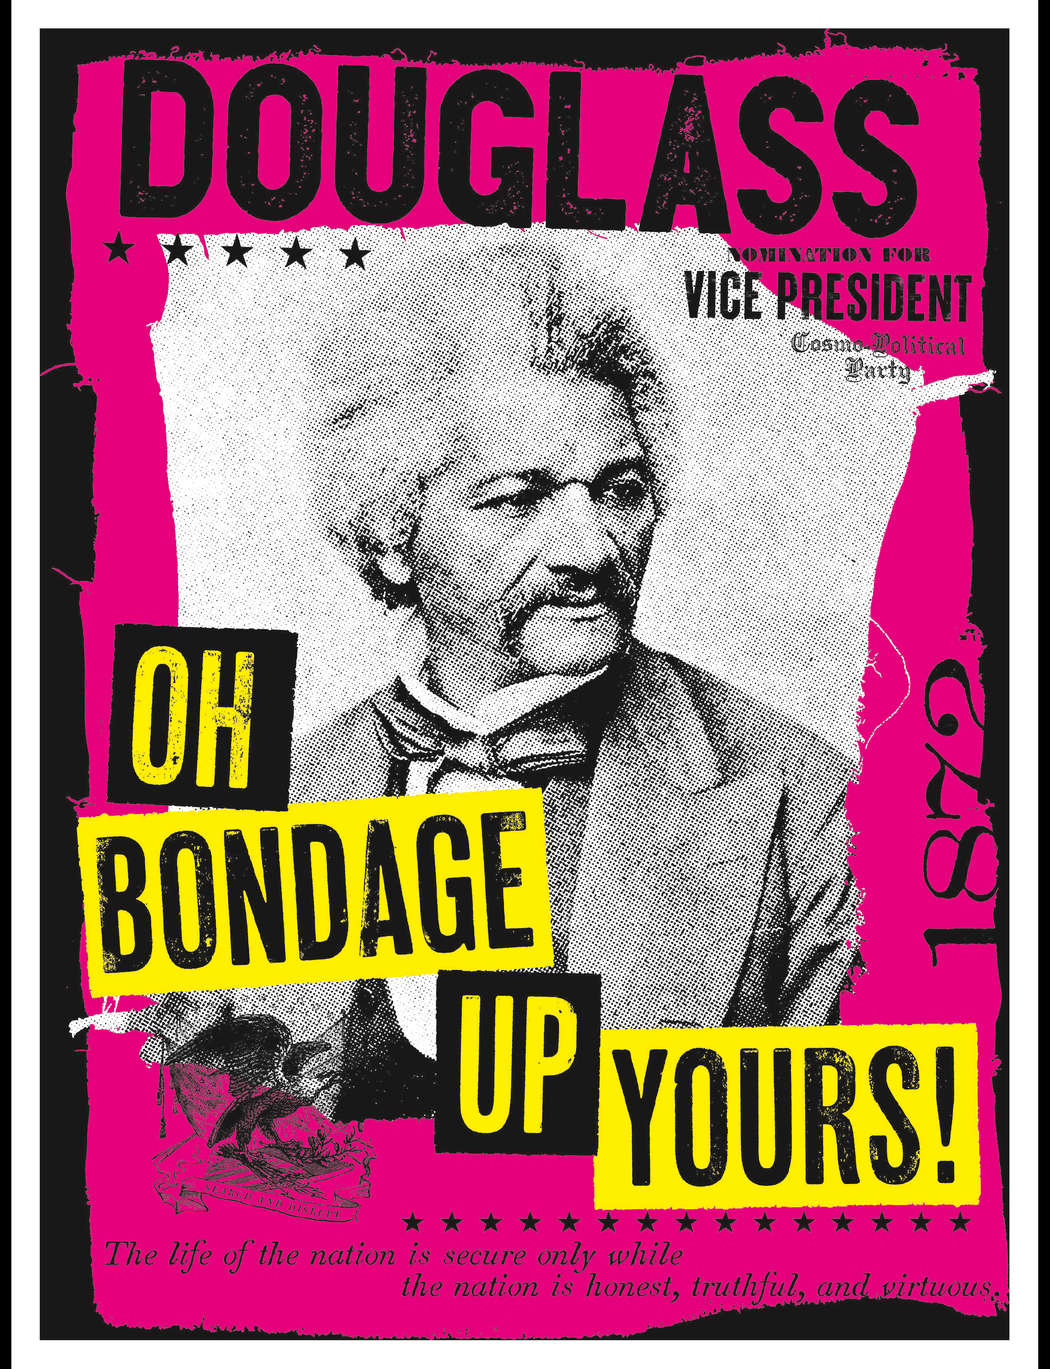 Stealworks "Frederick: Oh Bondage Up Yours!" Pink Campaign Poster